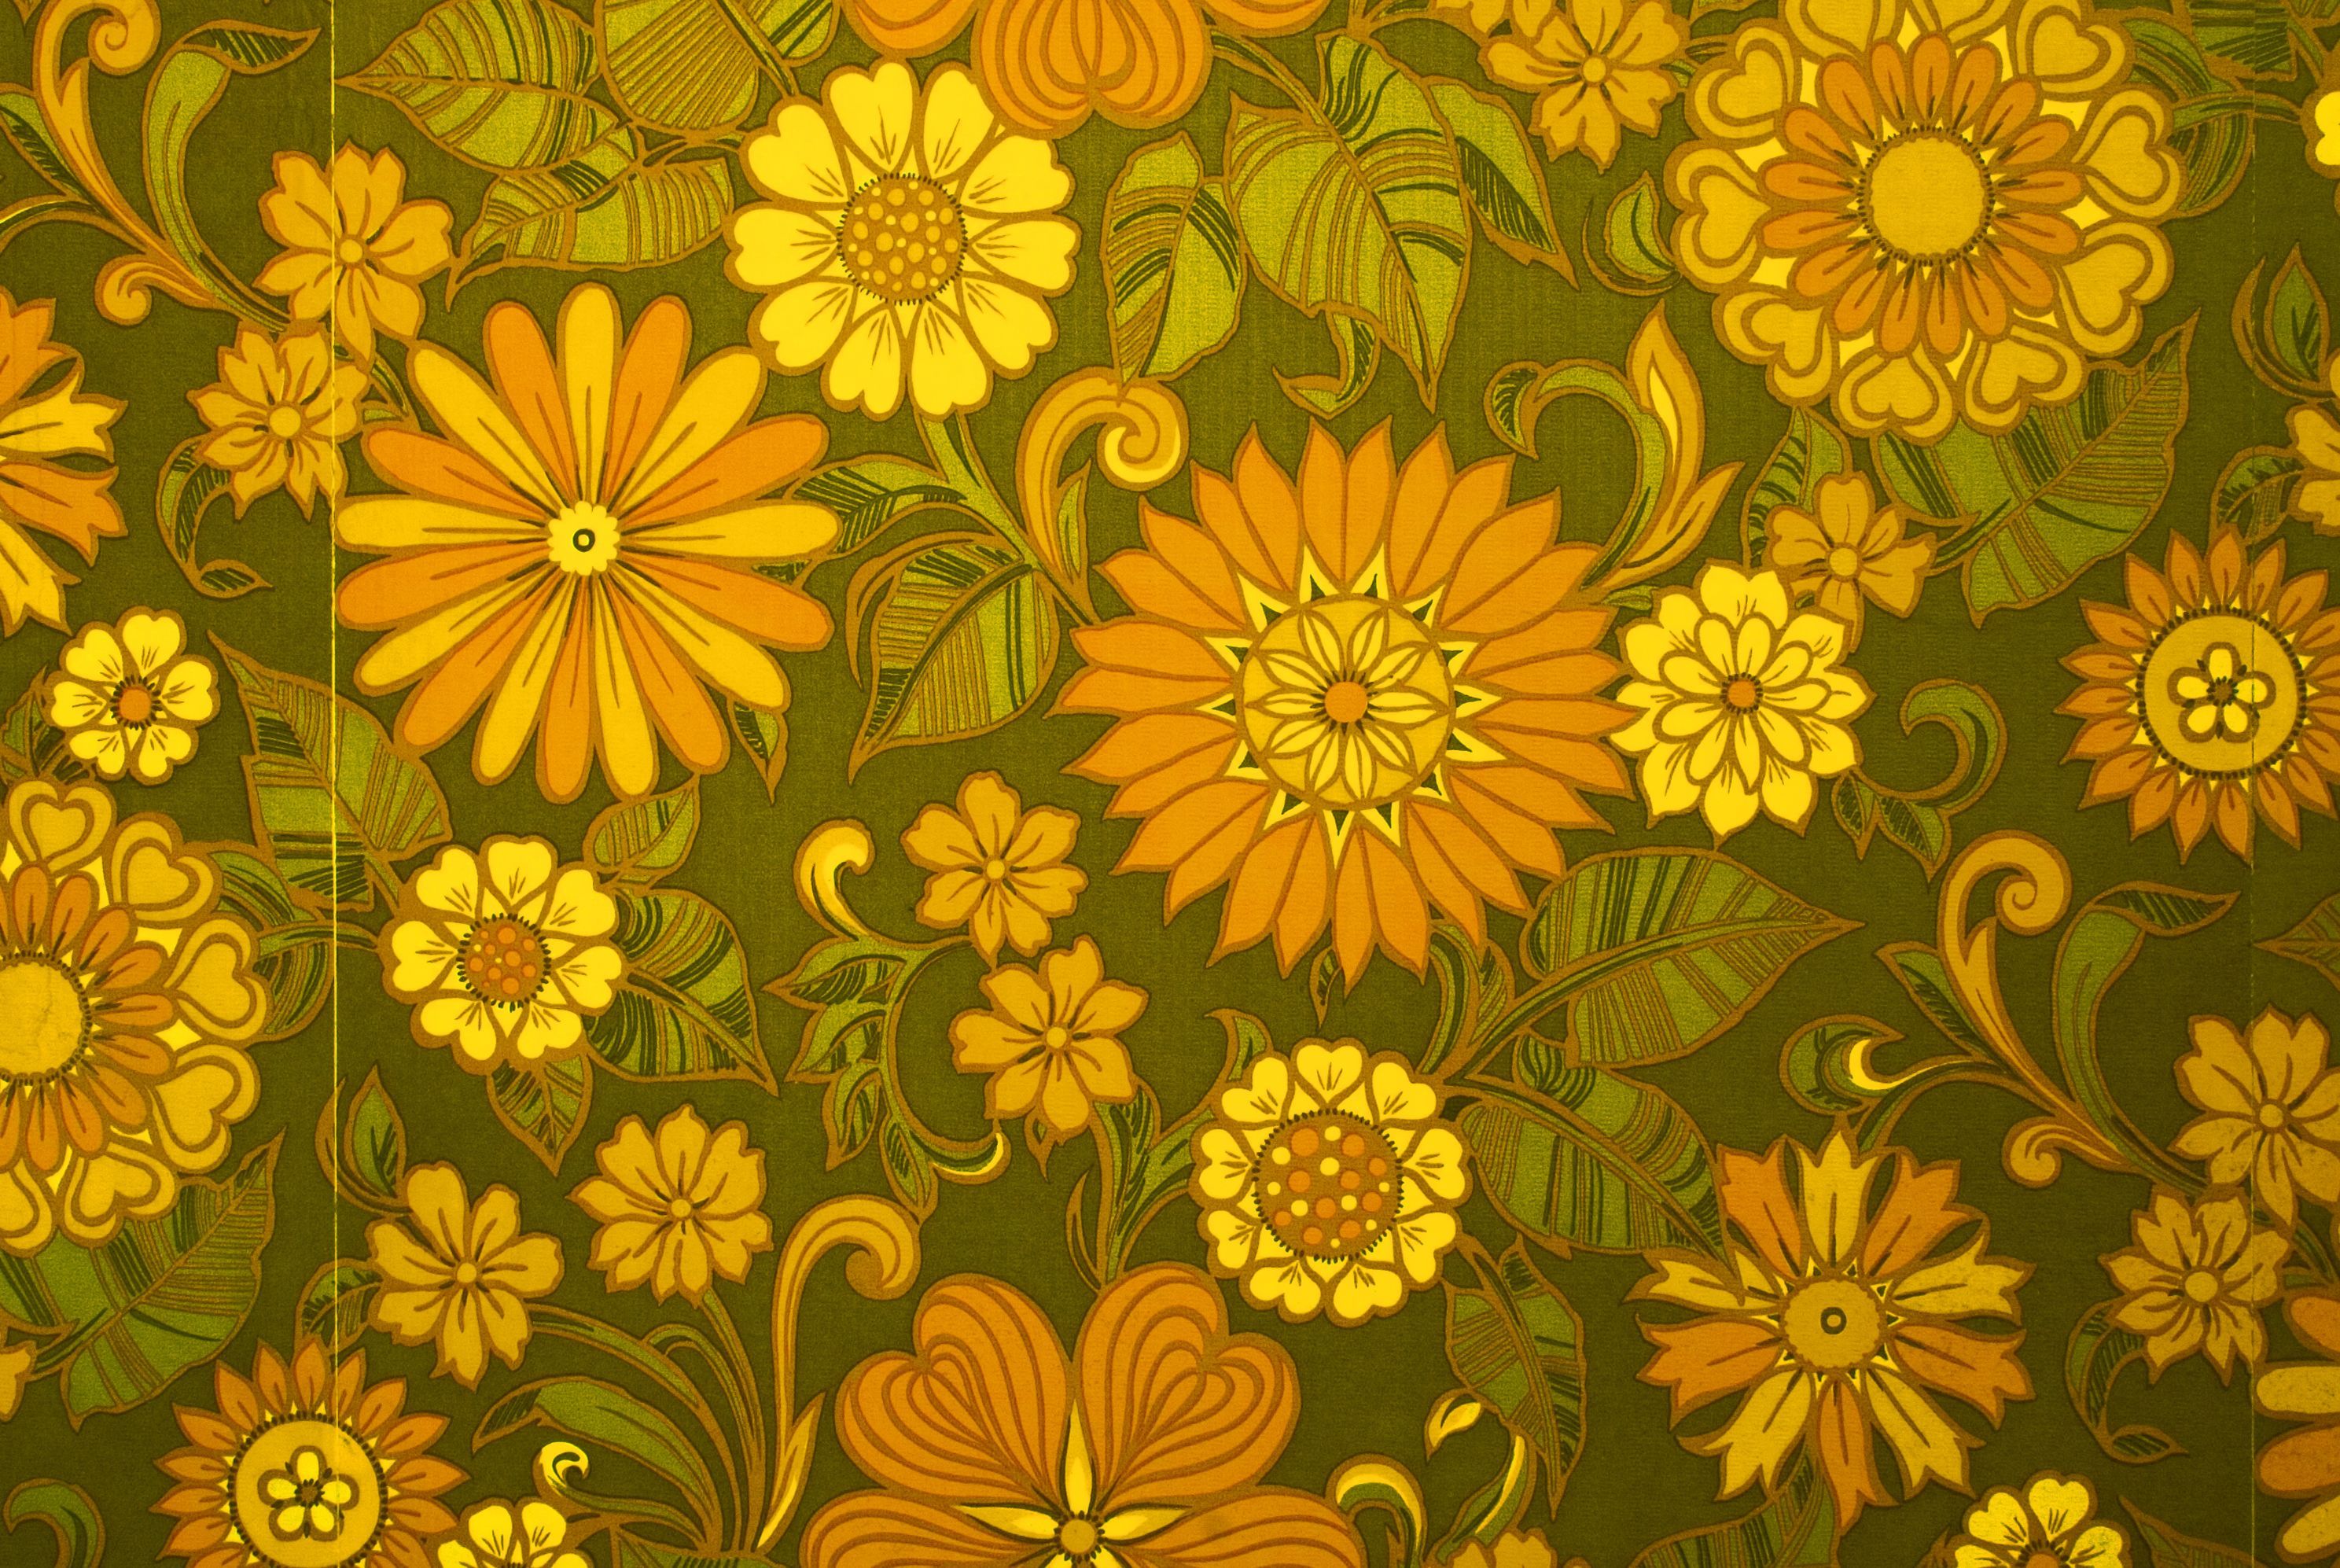 70s Style Wallpaper Free 70s .wallpaperaccess.com